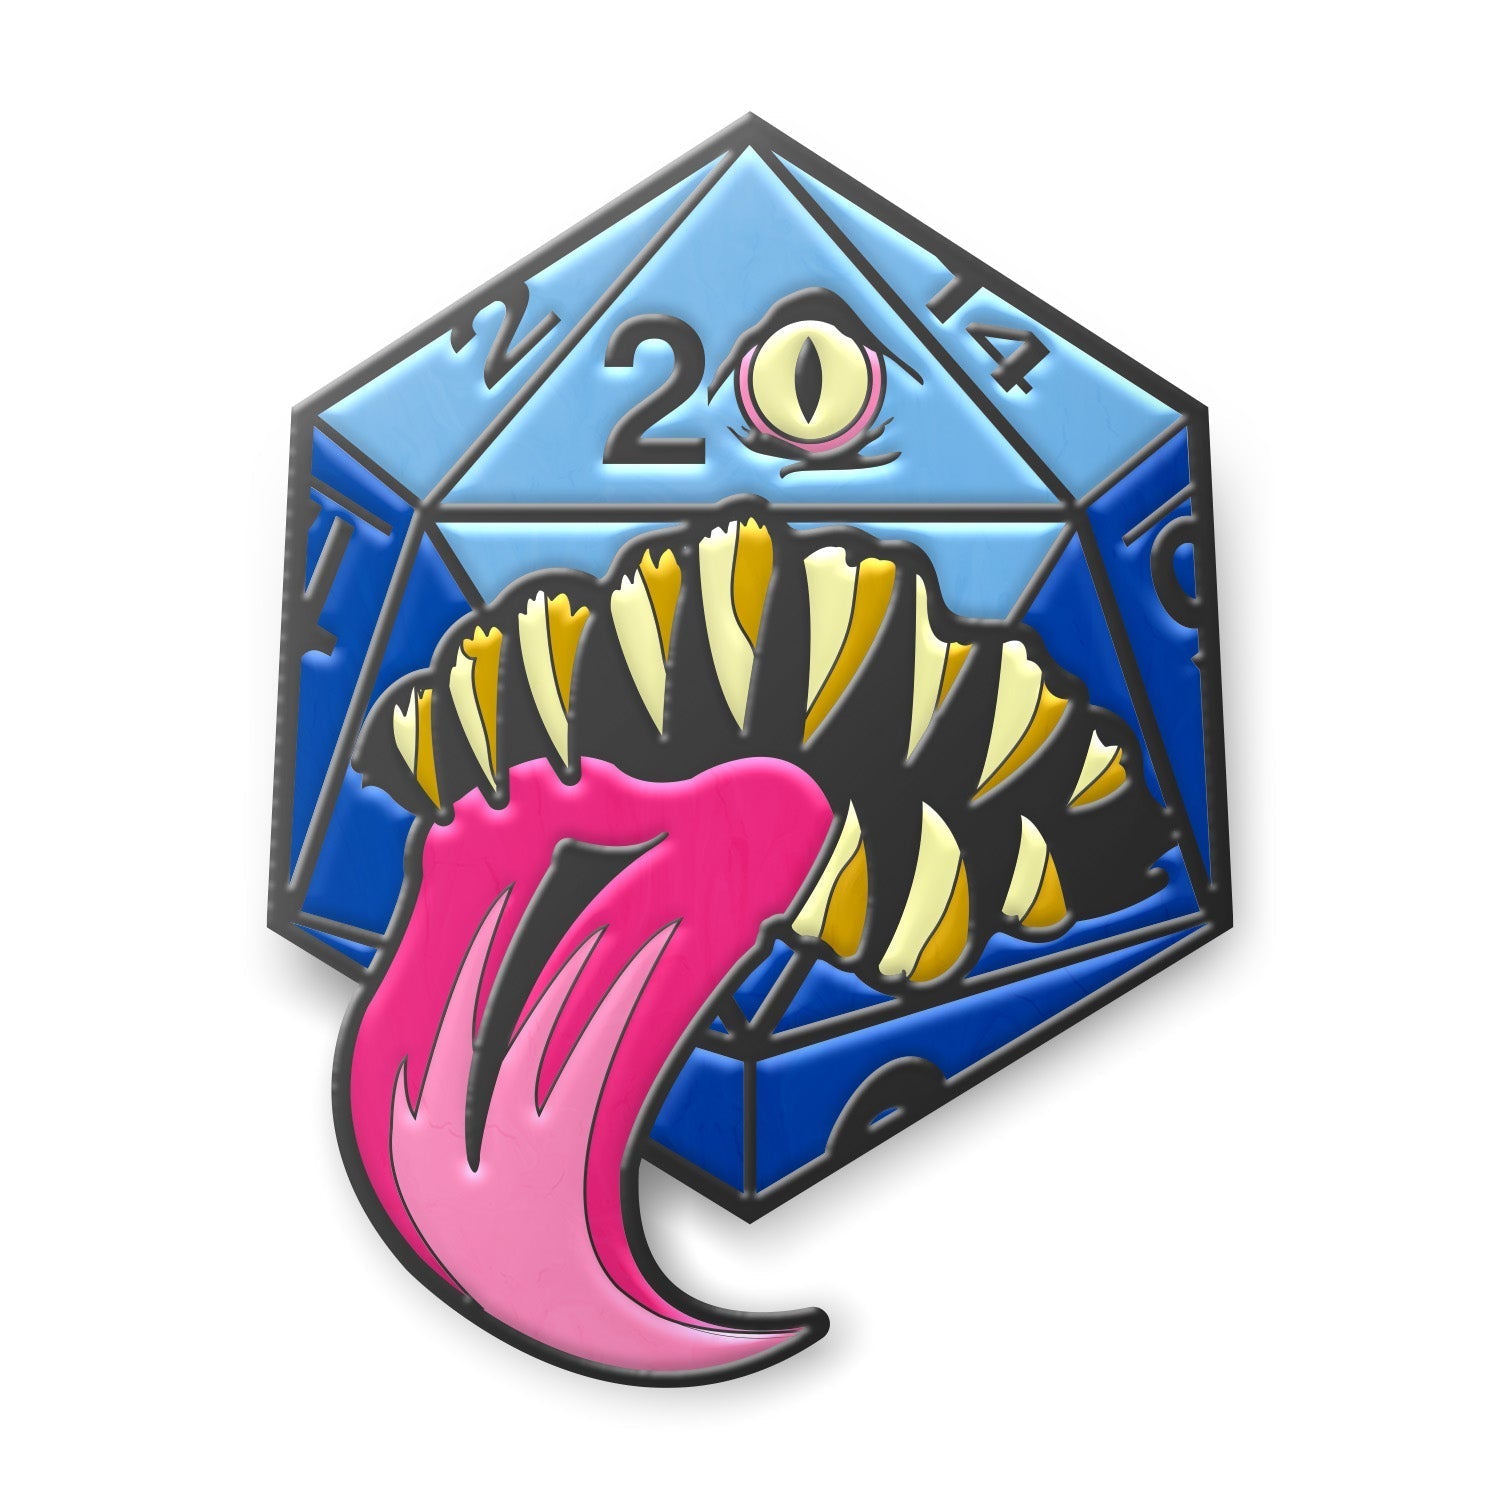 Mimic Die - Hard Enamel Adventure Dice Pin Metal by Norse Foundry - NOR 03639